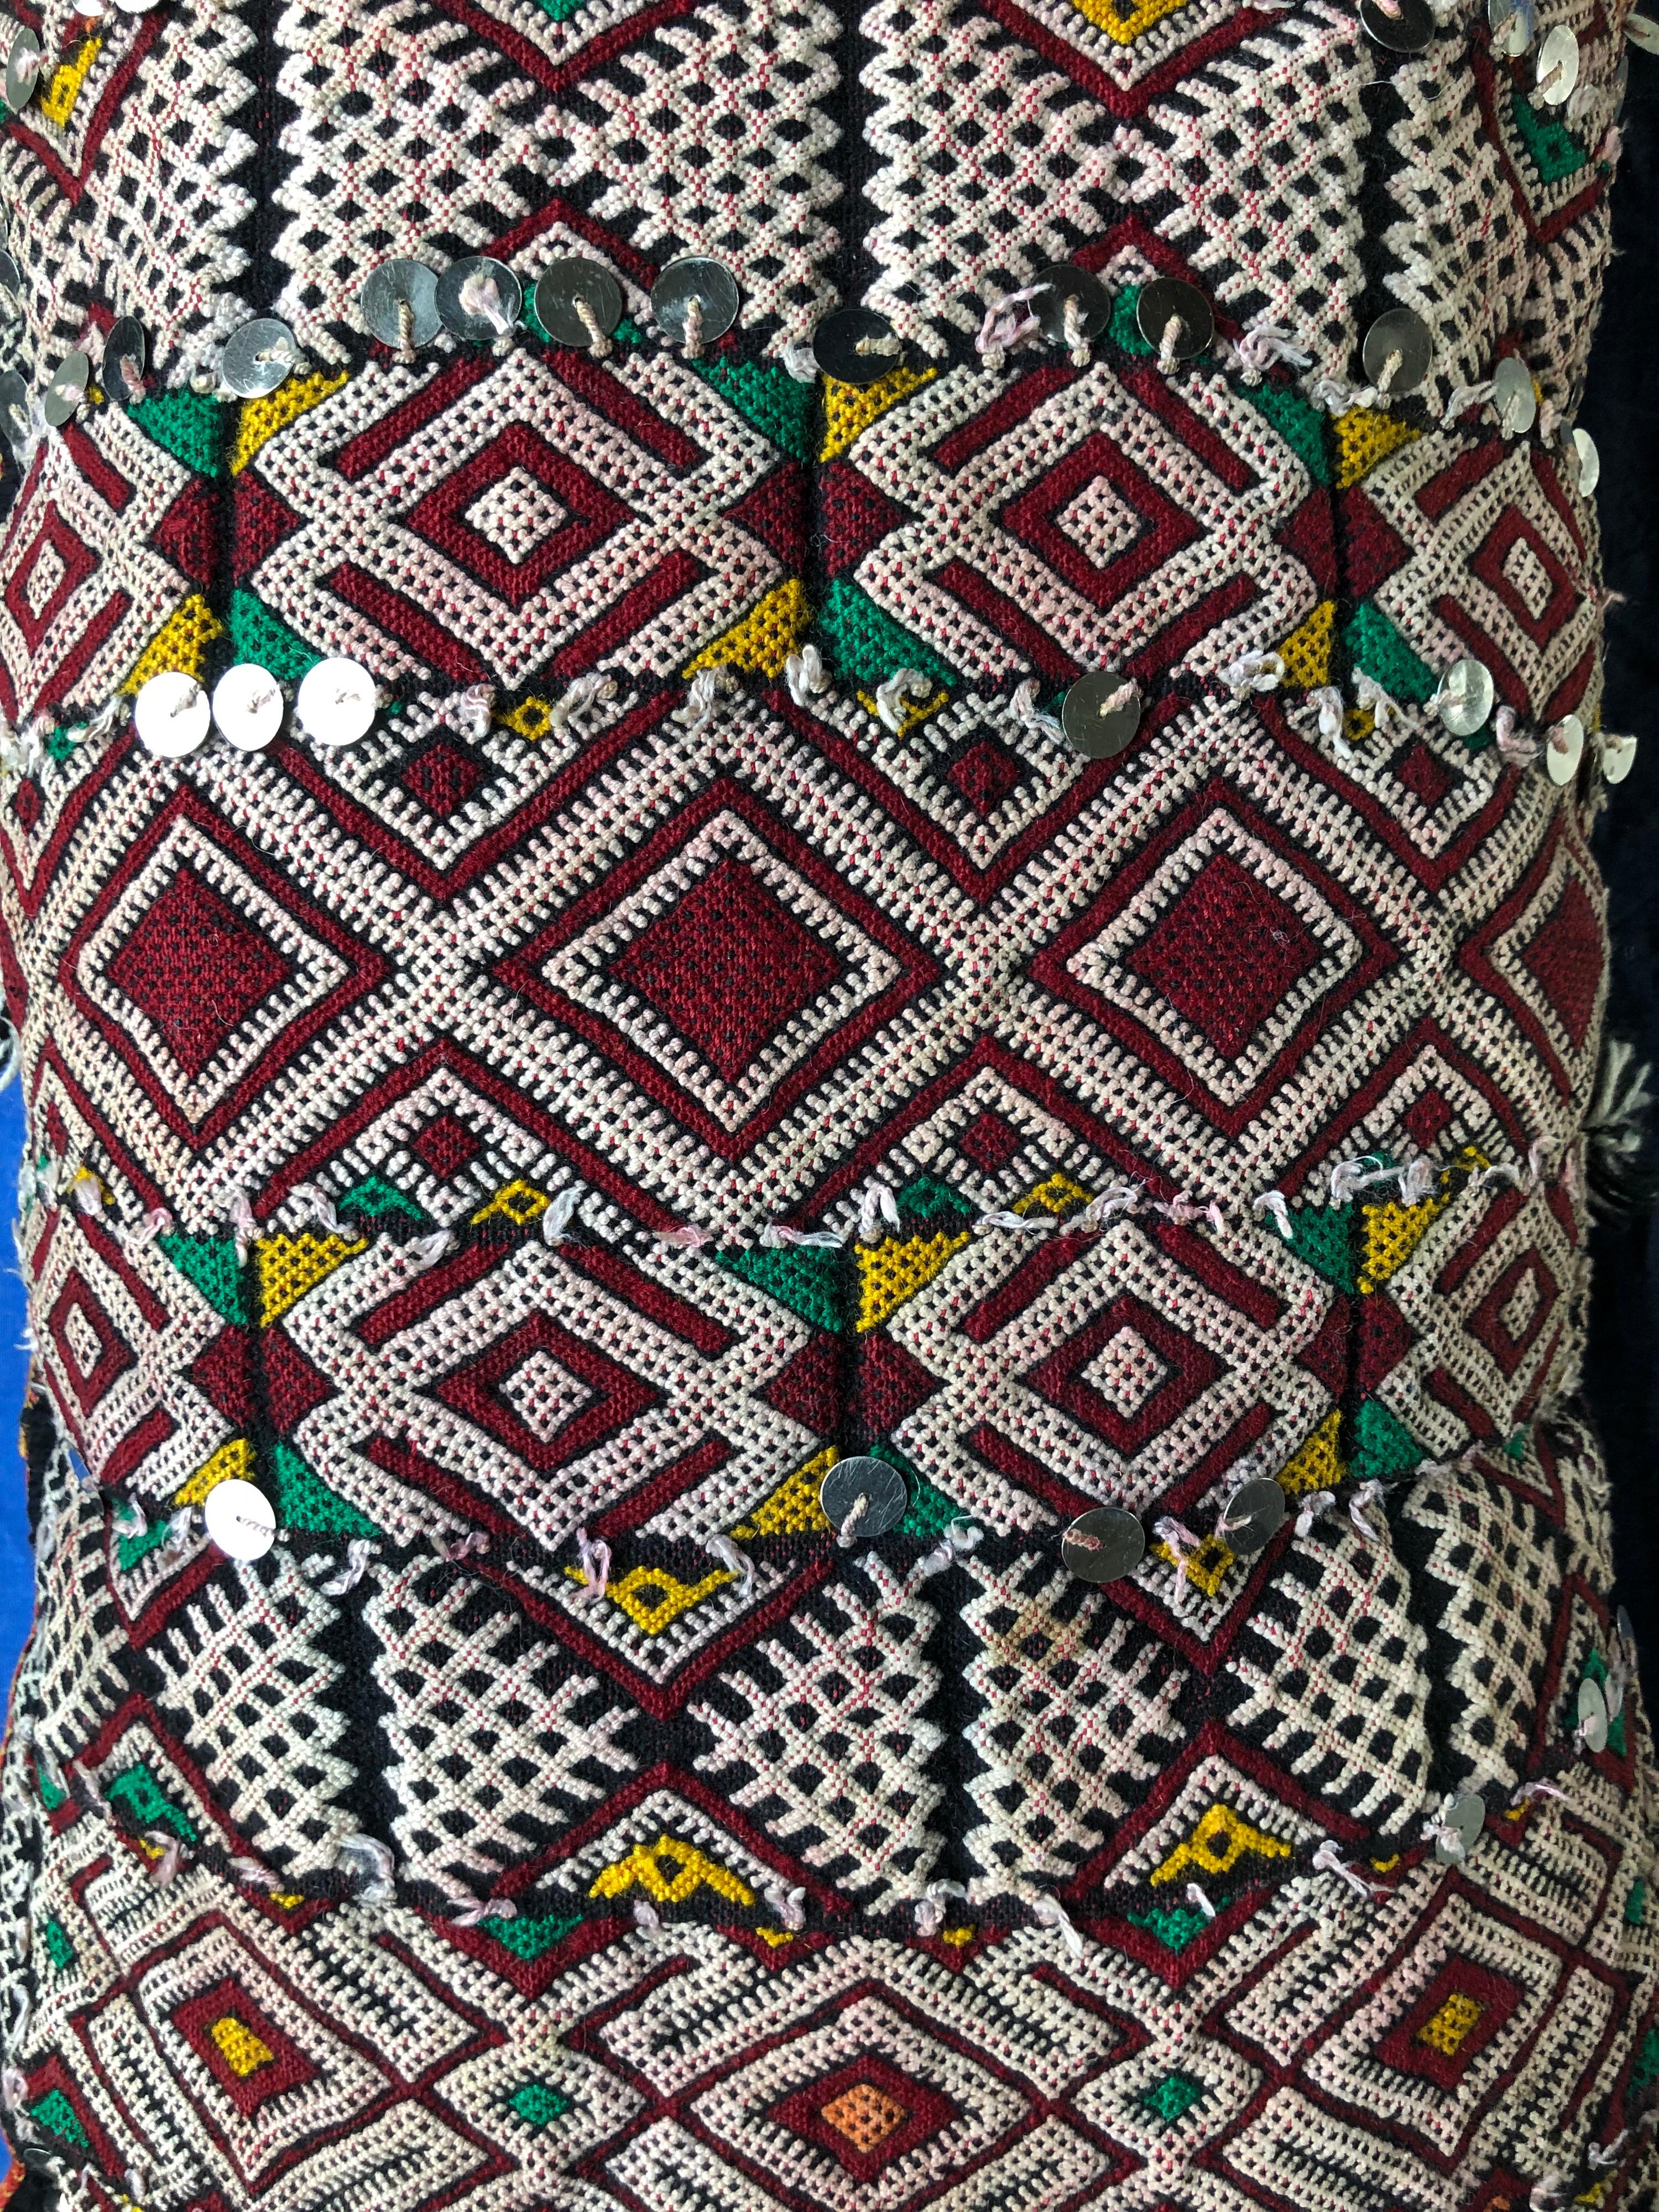 Vintage Moroccan Kilim Sequined Throw Pillow Handwoven Wool Berber Tribal Boho For Sale 1